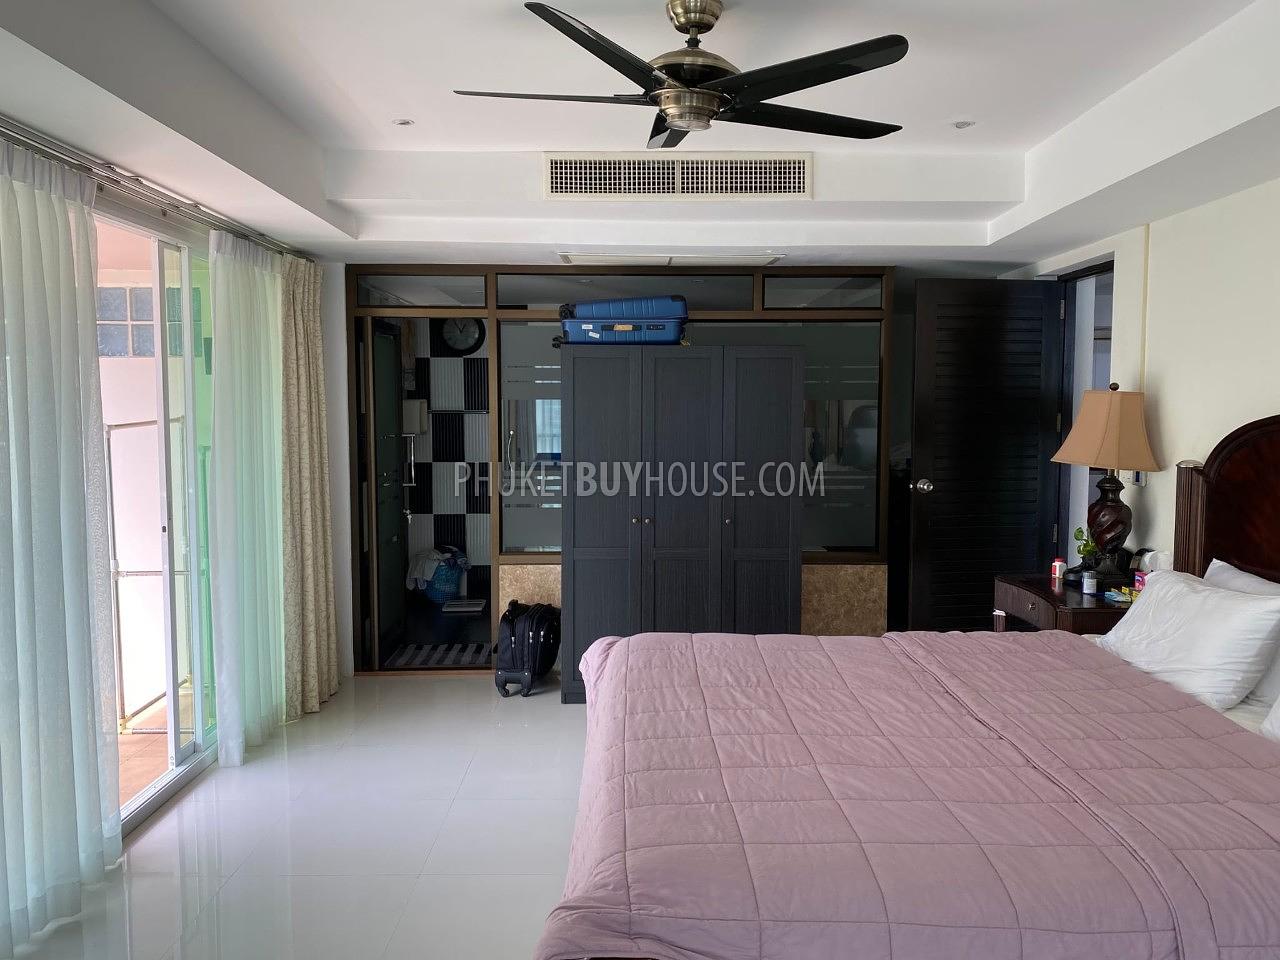 PAT7064: 3-Bedroom Apartment on the top floor, Patong. Photo #13